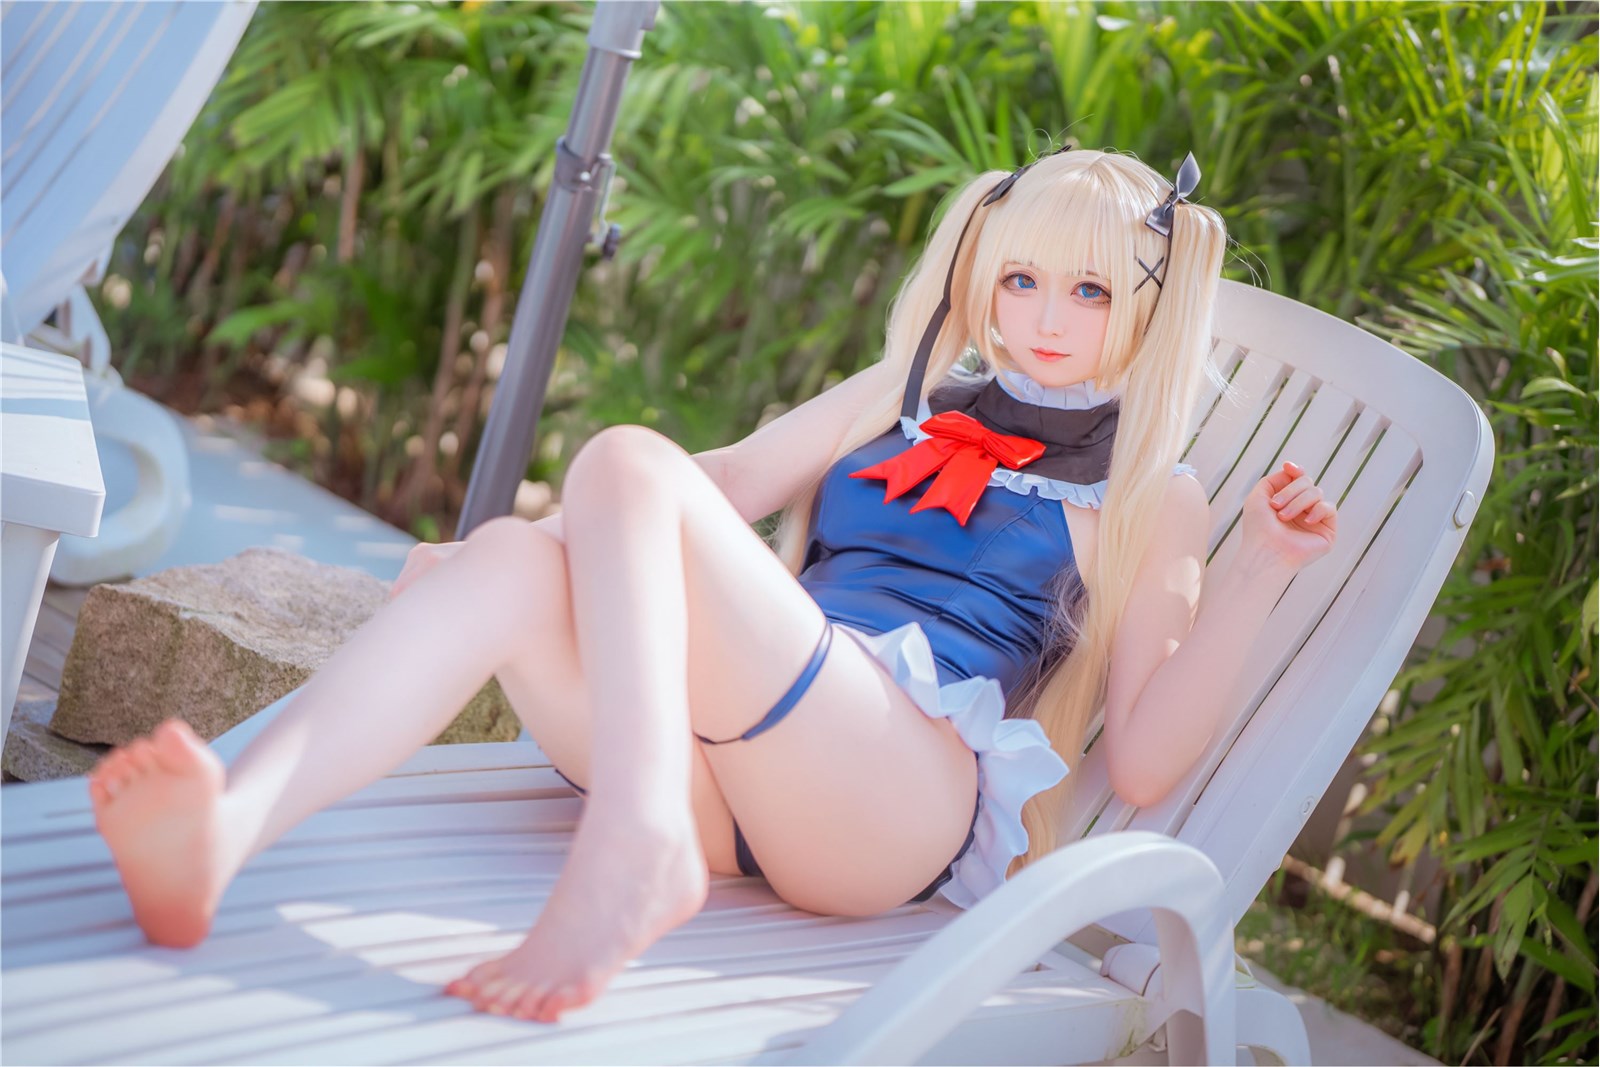 Cos sayako four years old this year - Mary Ross swimsuit コ ス プ レ photo(11)